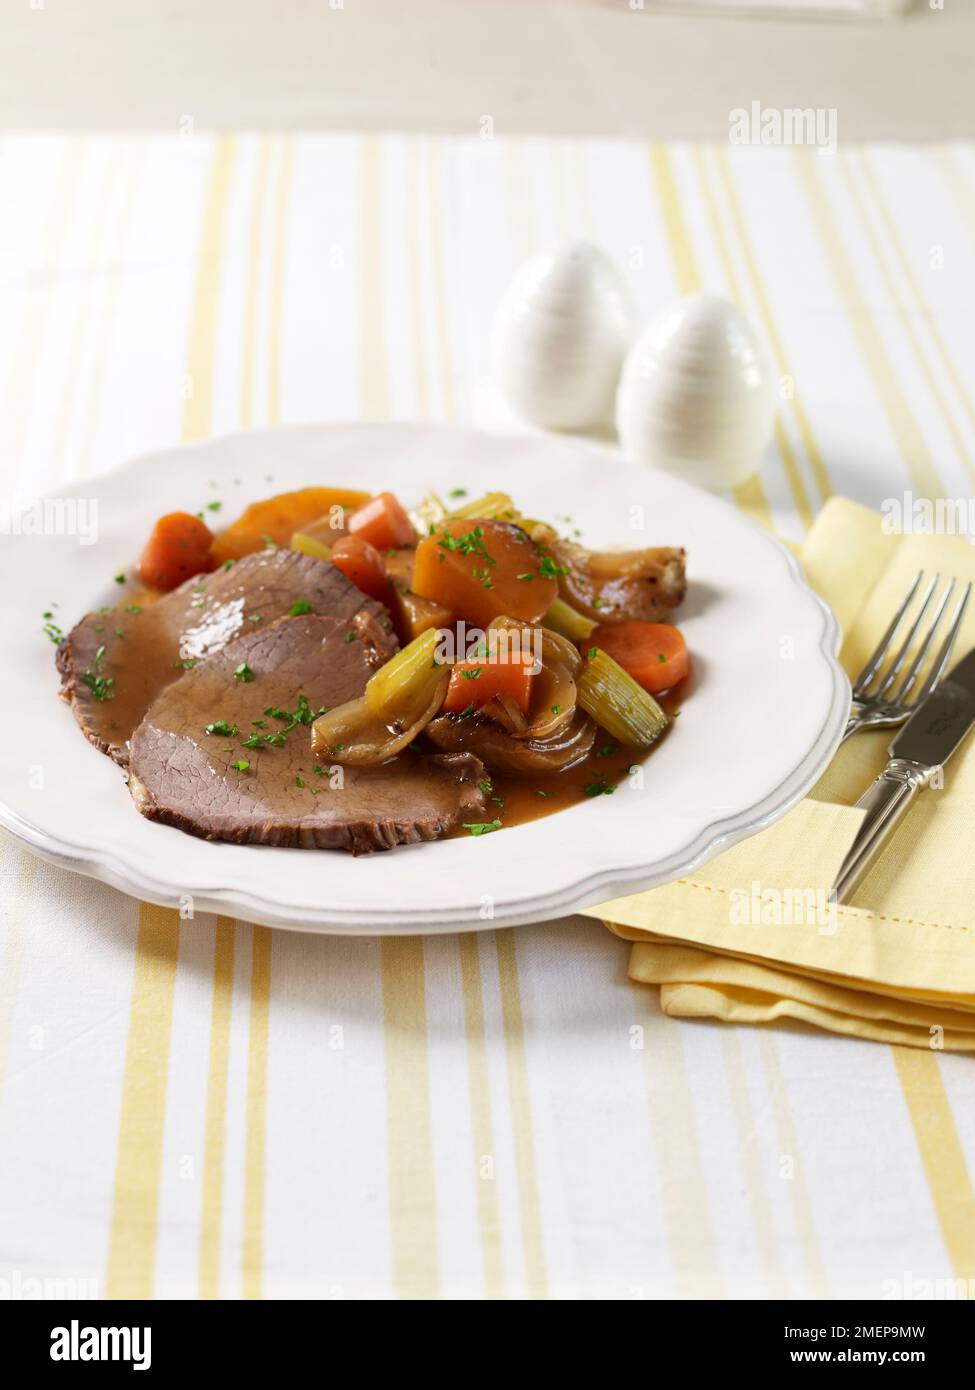 Beef pot roast with vegetables Stock Photo